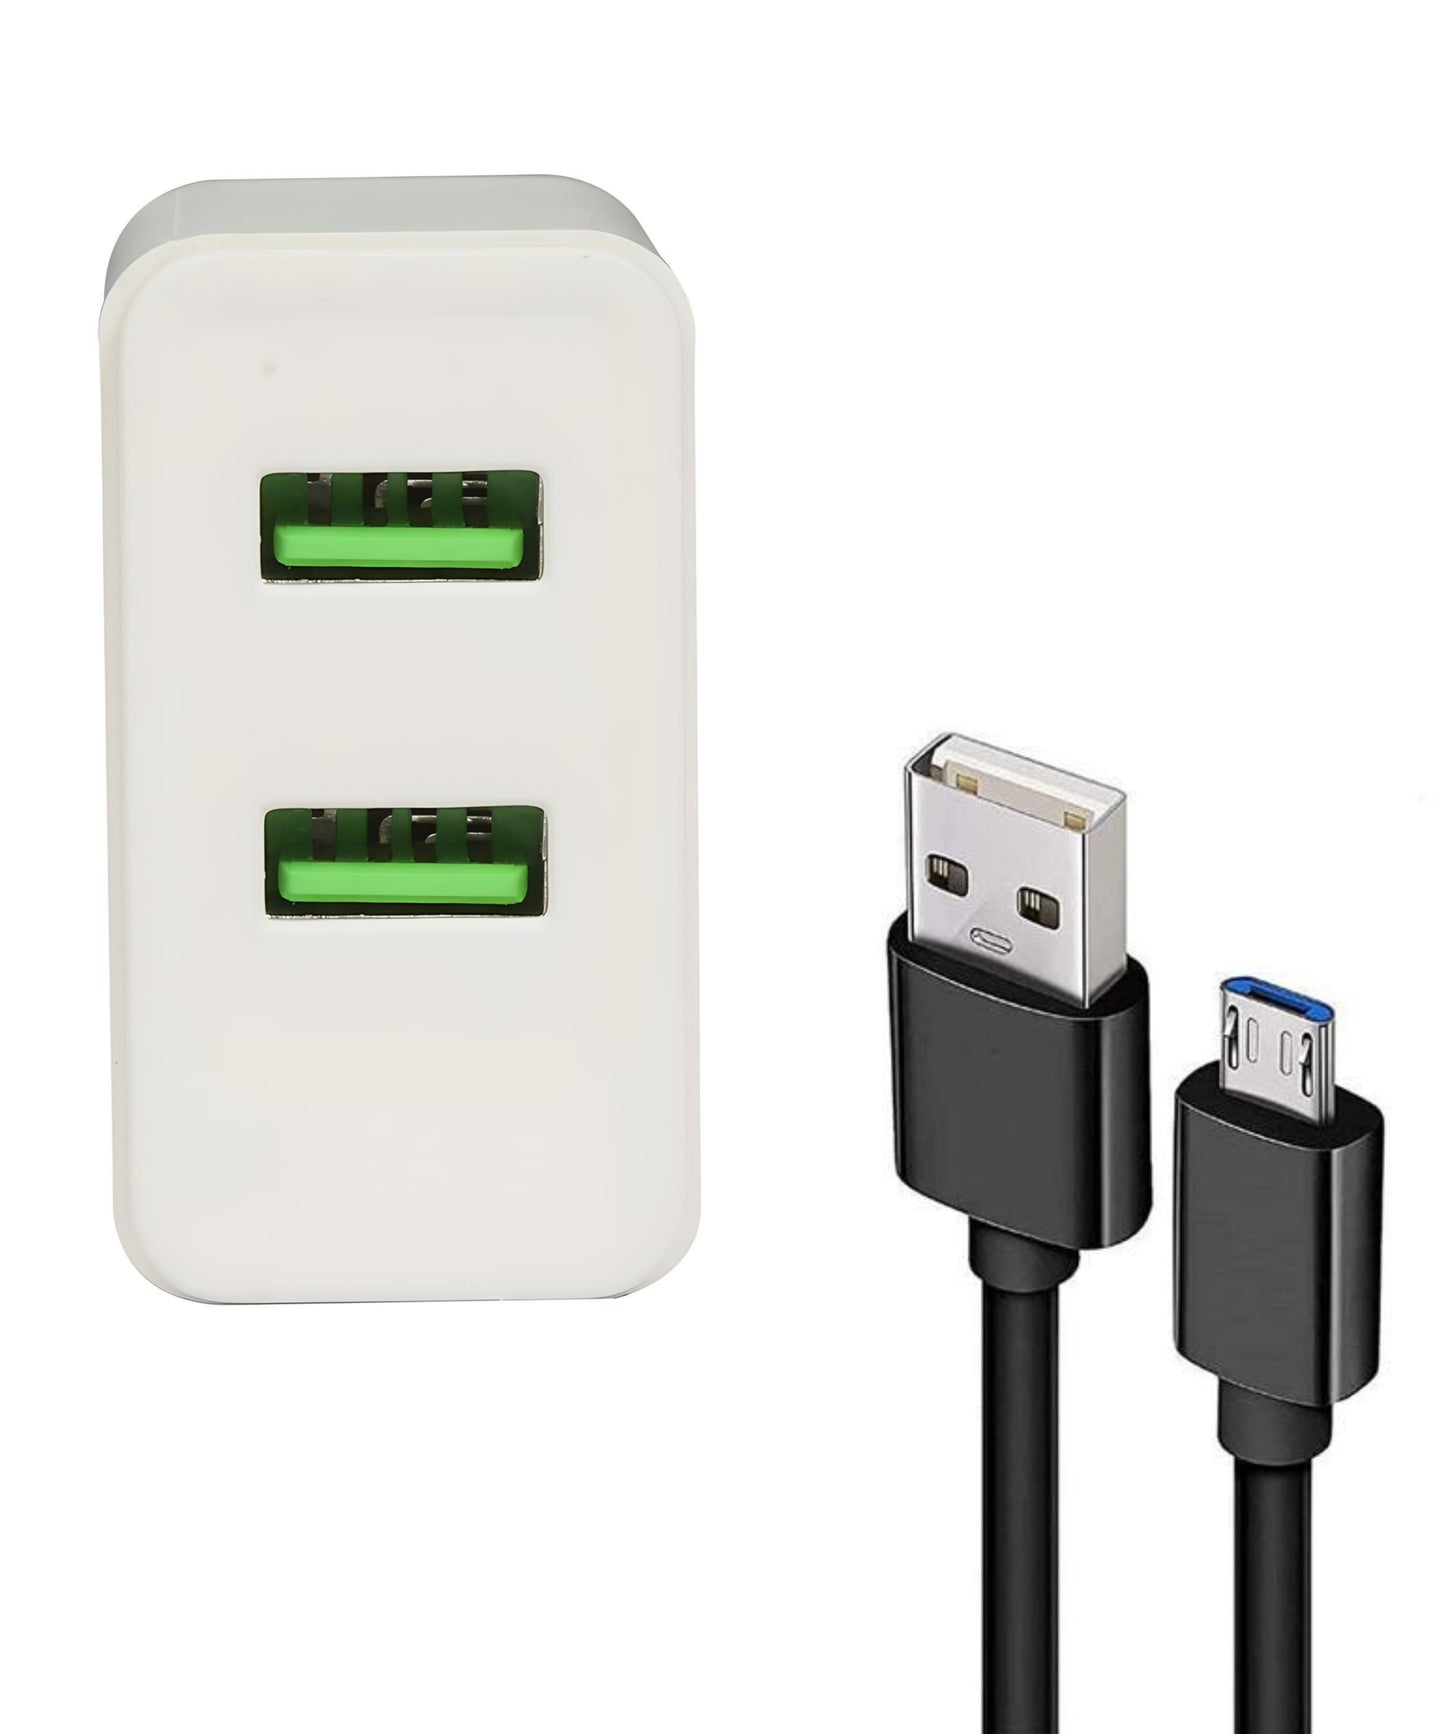 La' Forte Mobile Wall Charger with Dual USB Output (2.1 Amp, White)